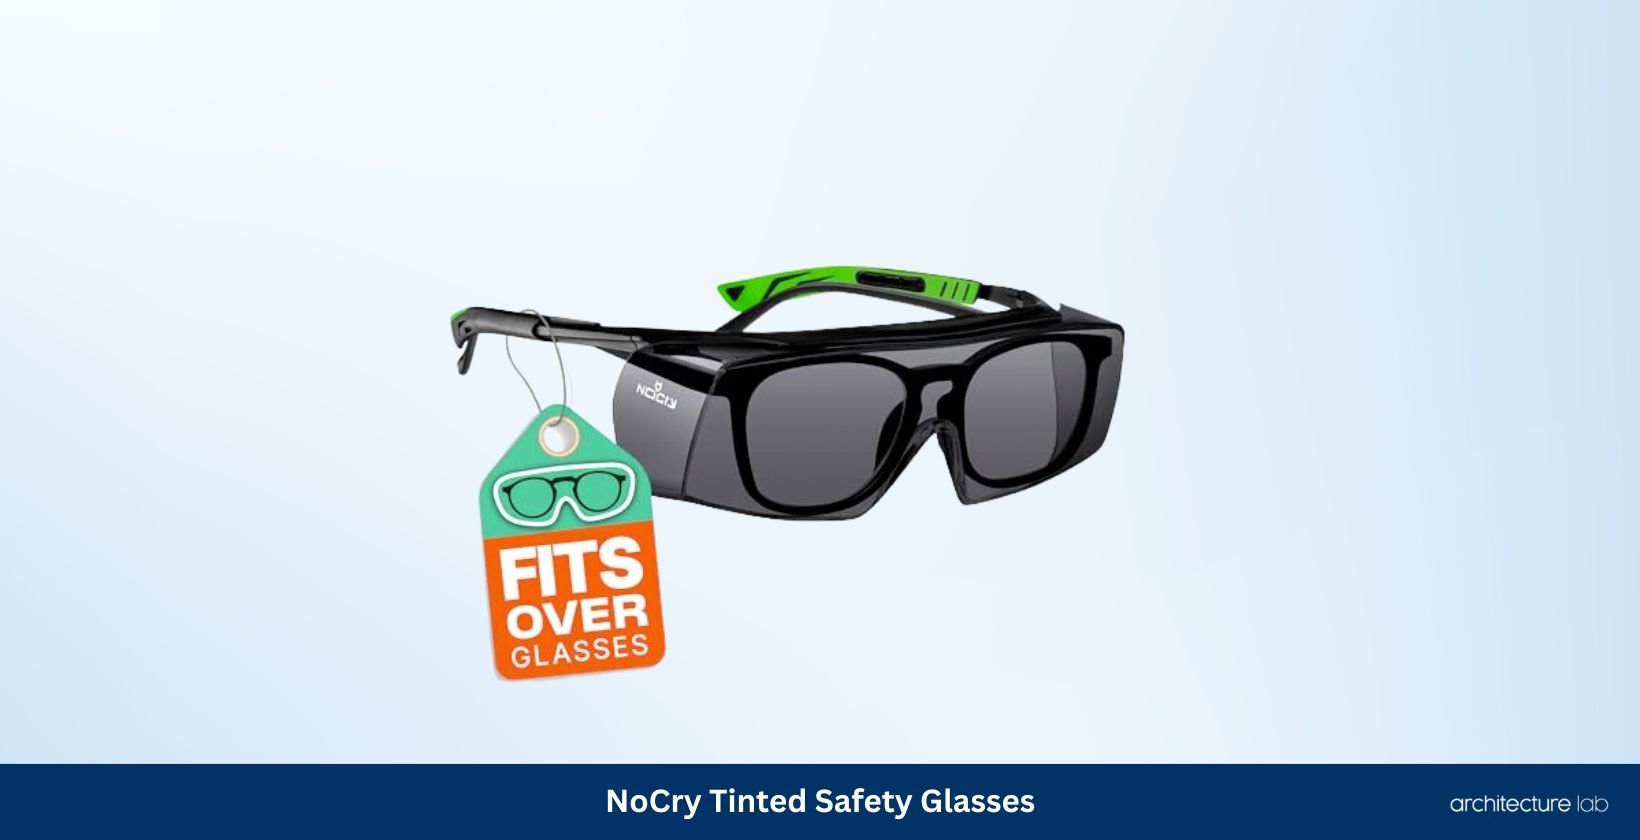 Nocry over glasses safety glasses